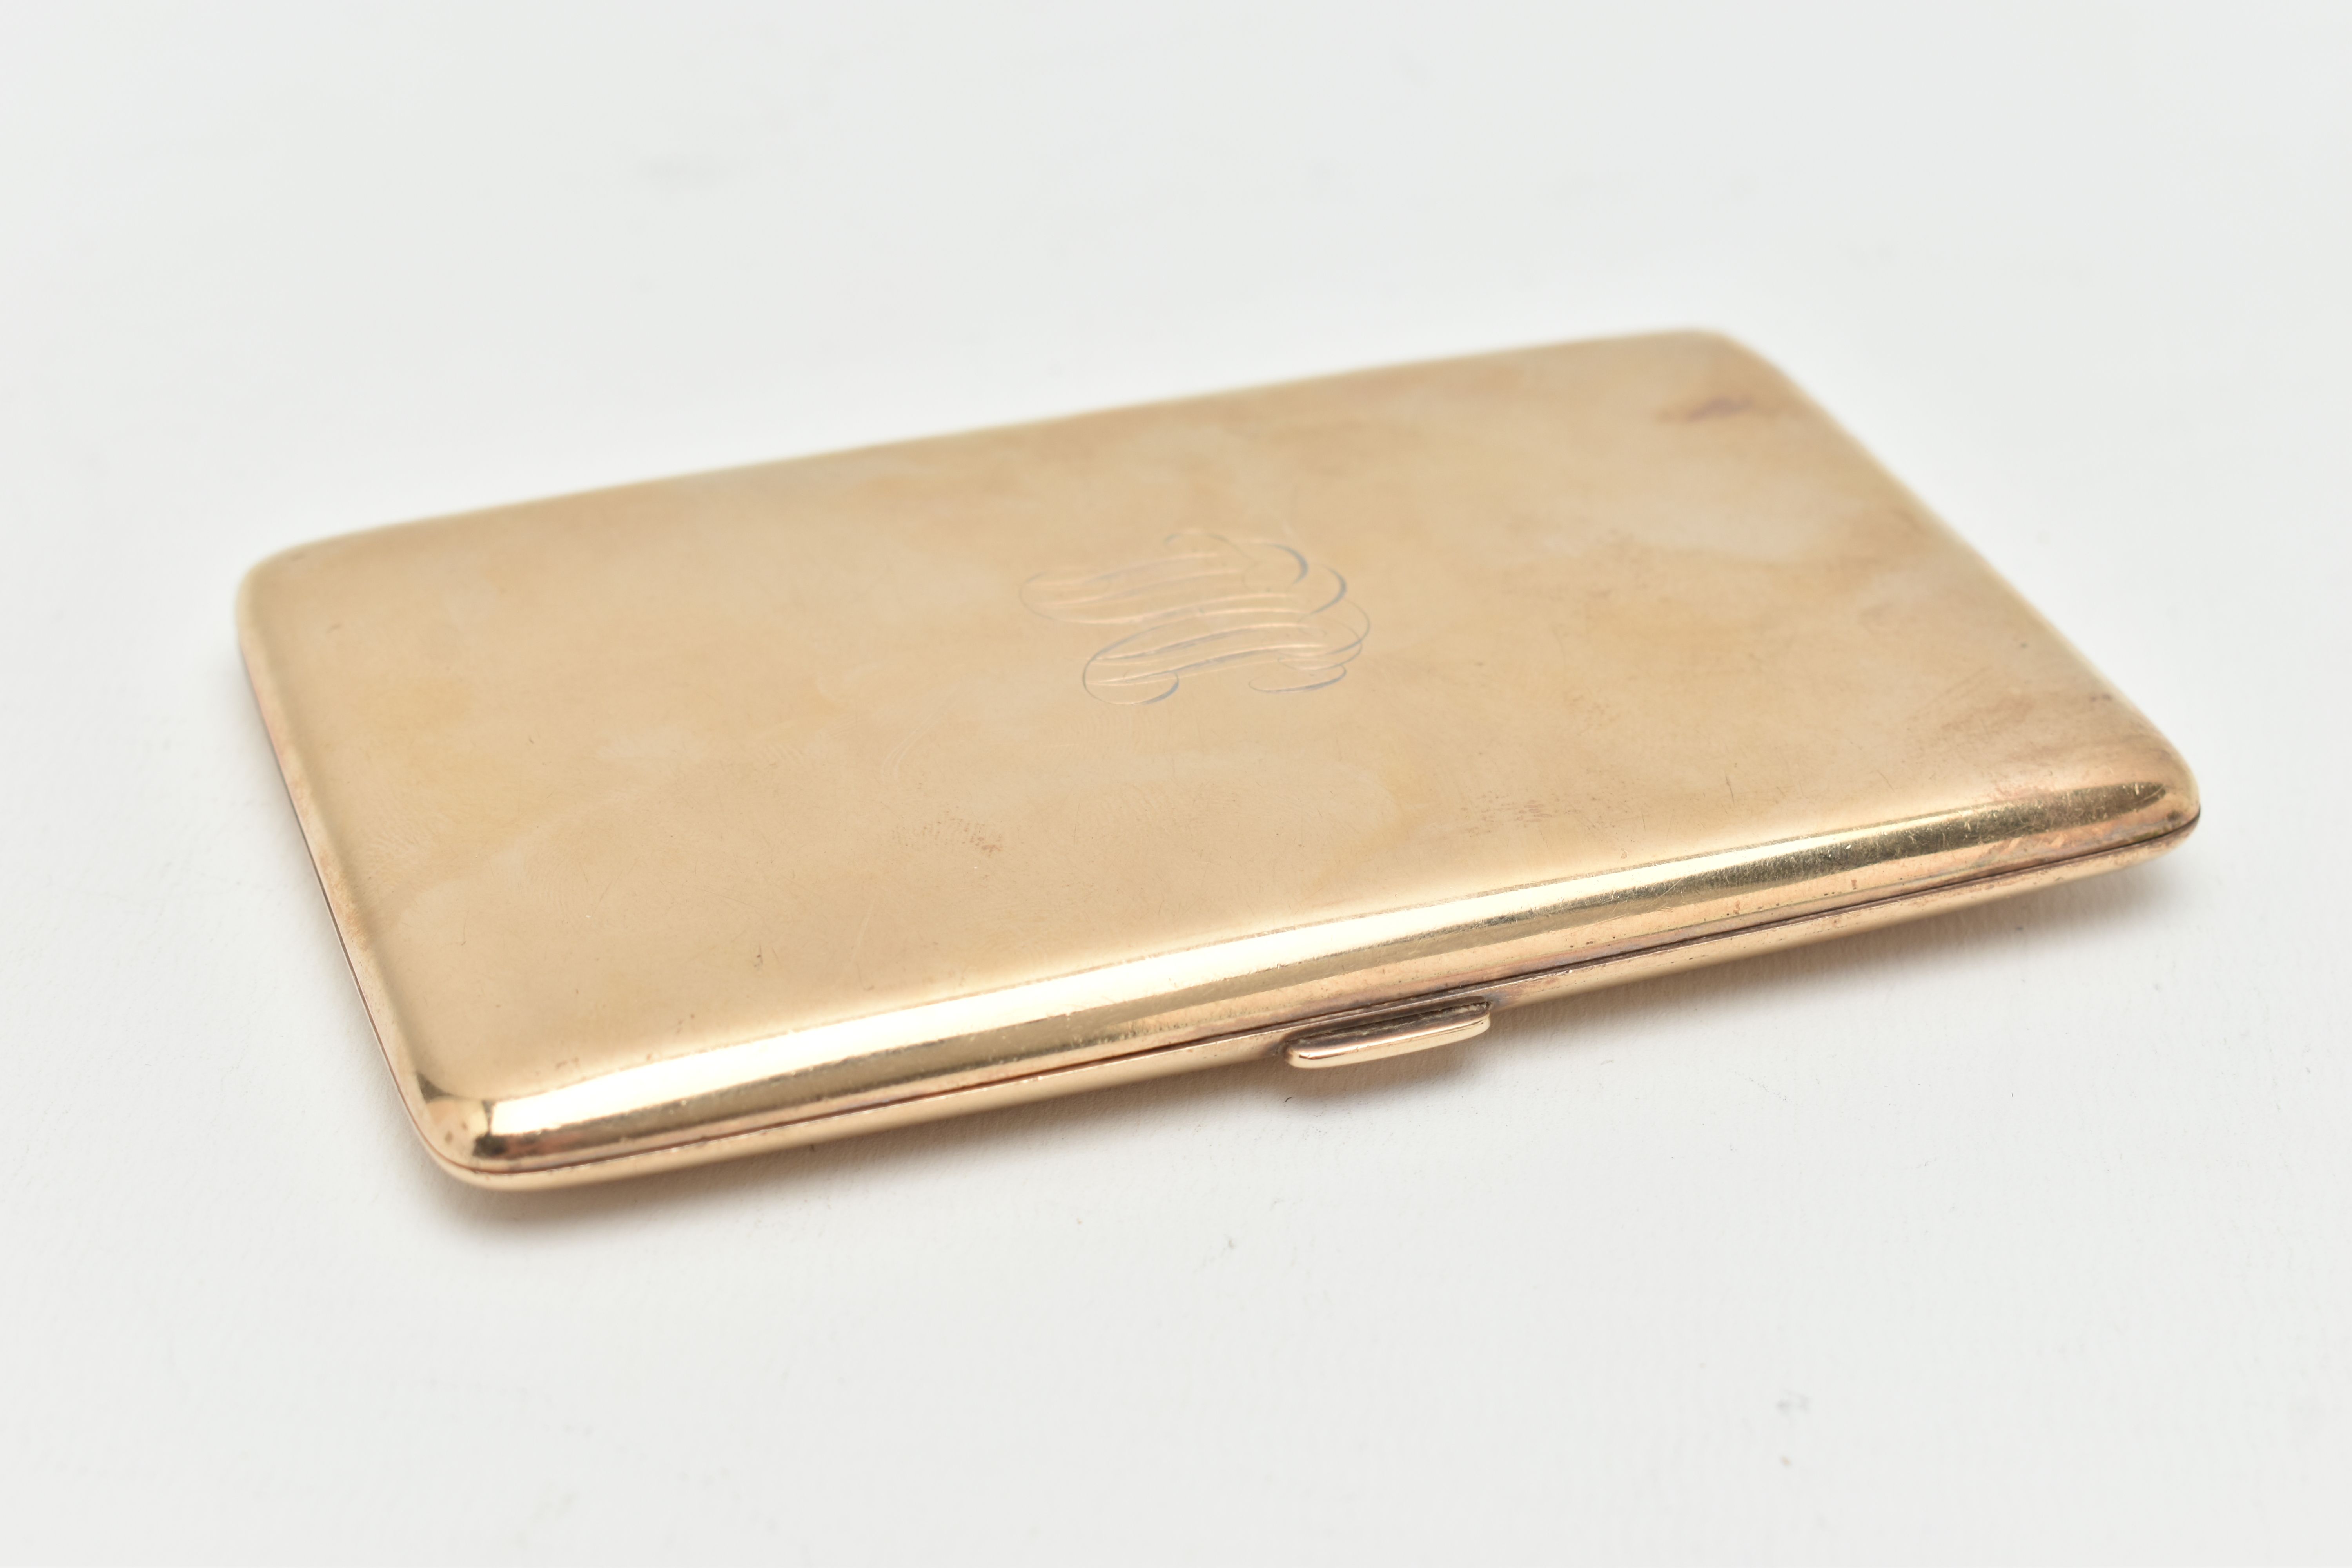 AN EARLY 20TH CENTURY, 9CT GOLD CIGARETTE CASE, of a rectangular form, polished design with - Image 3 of 6